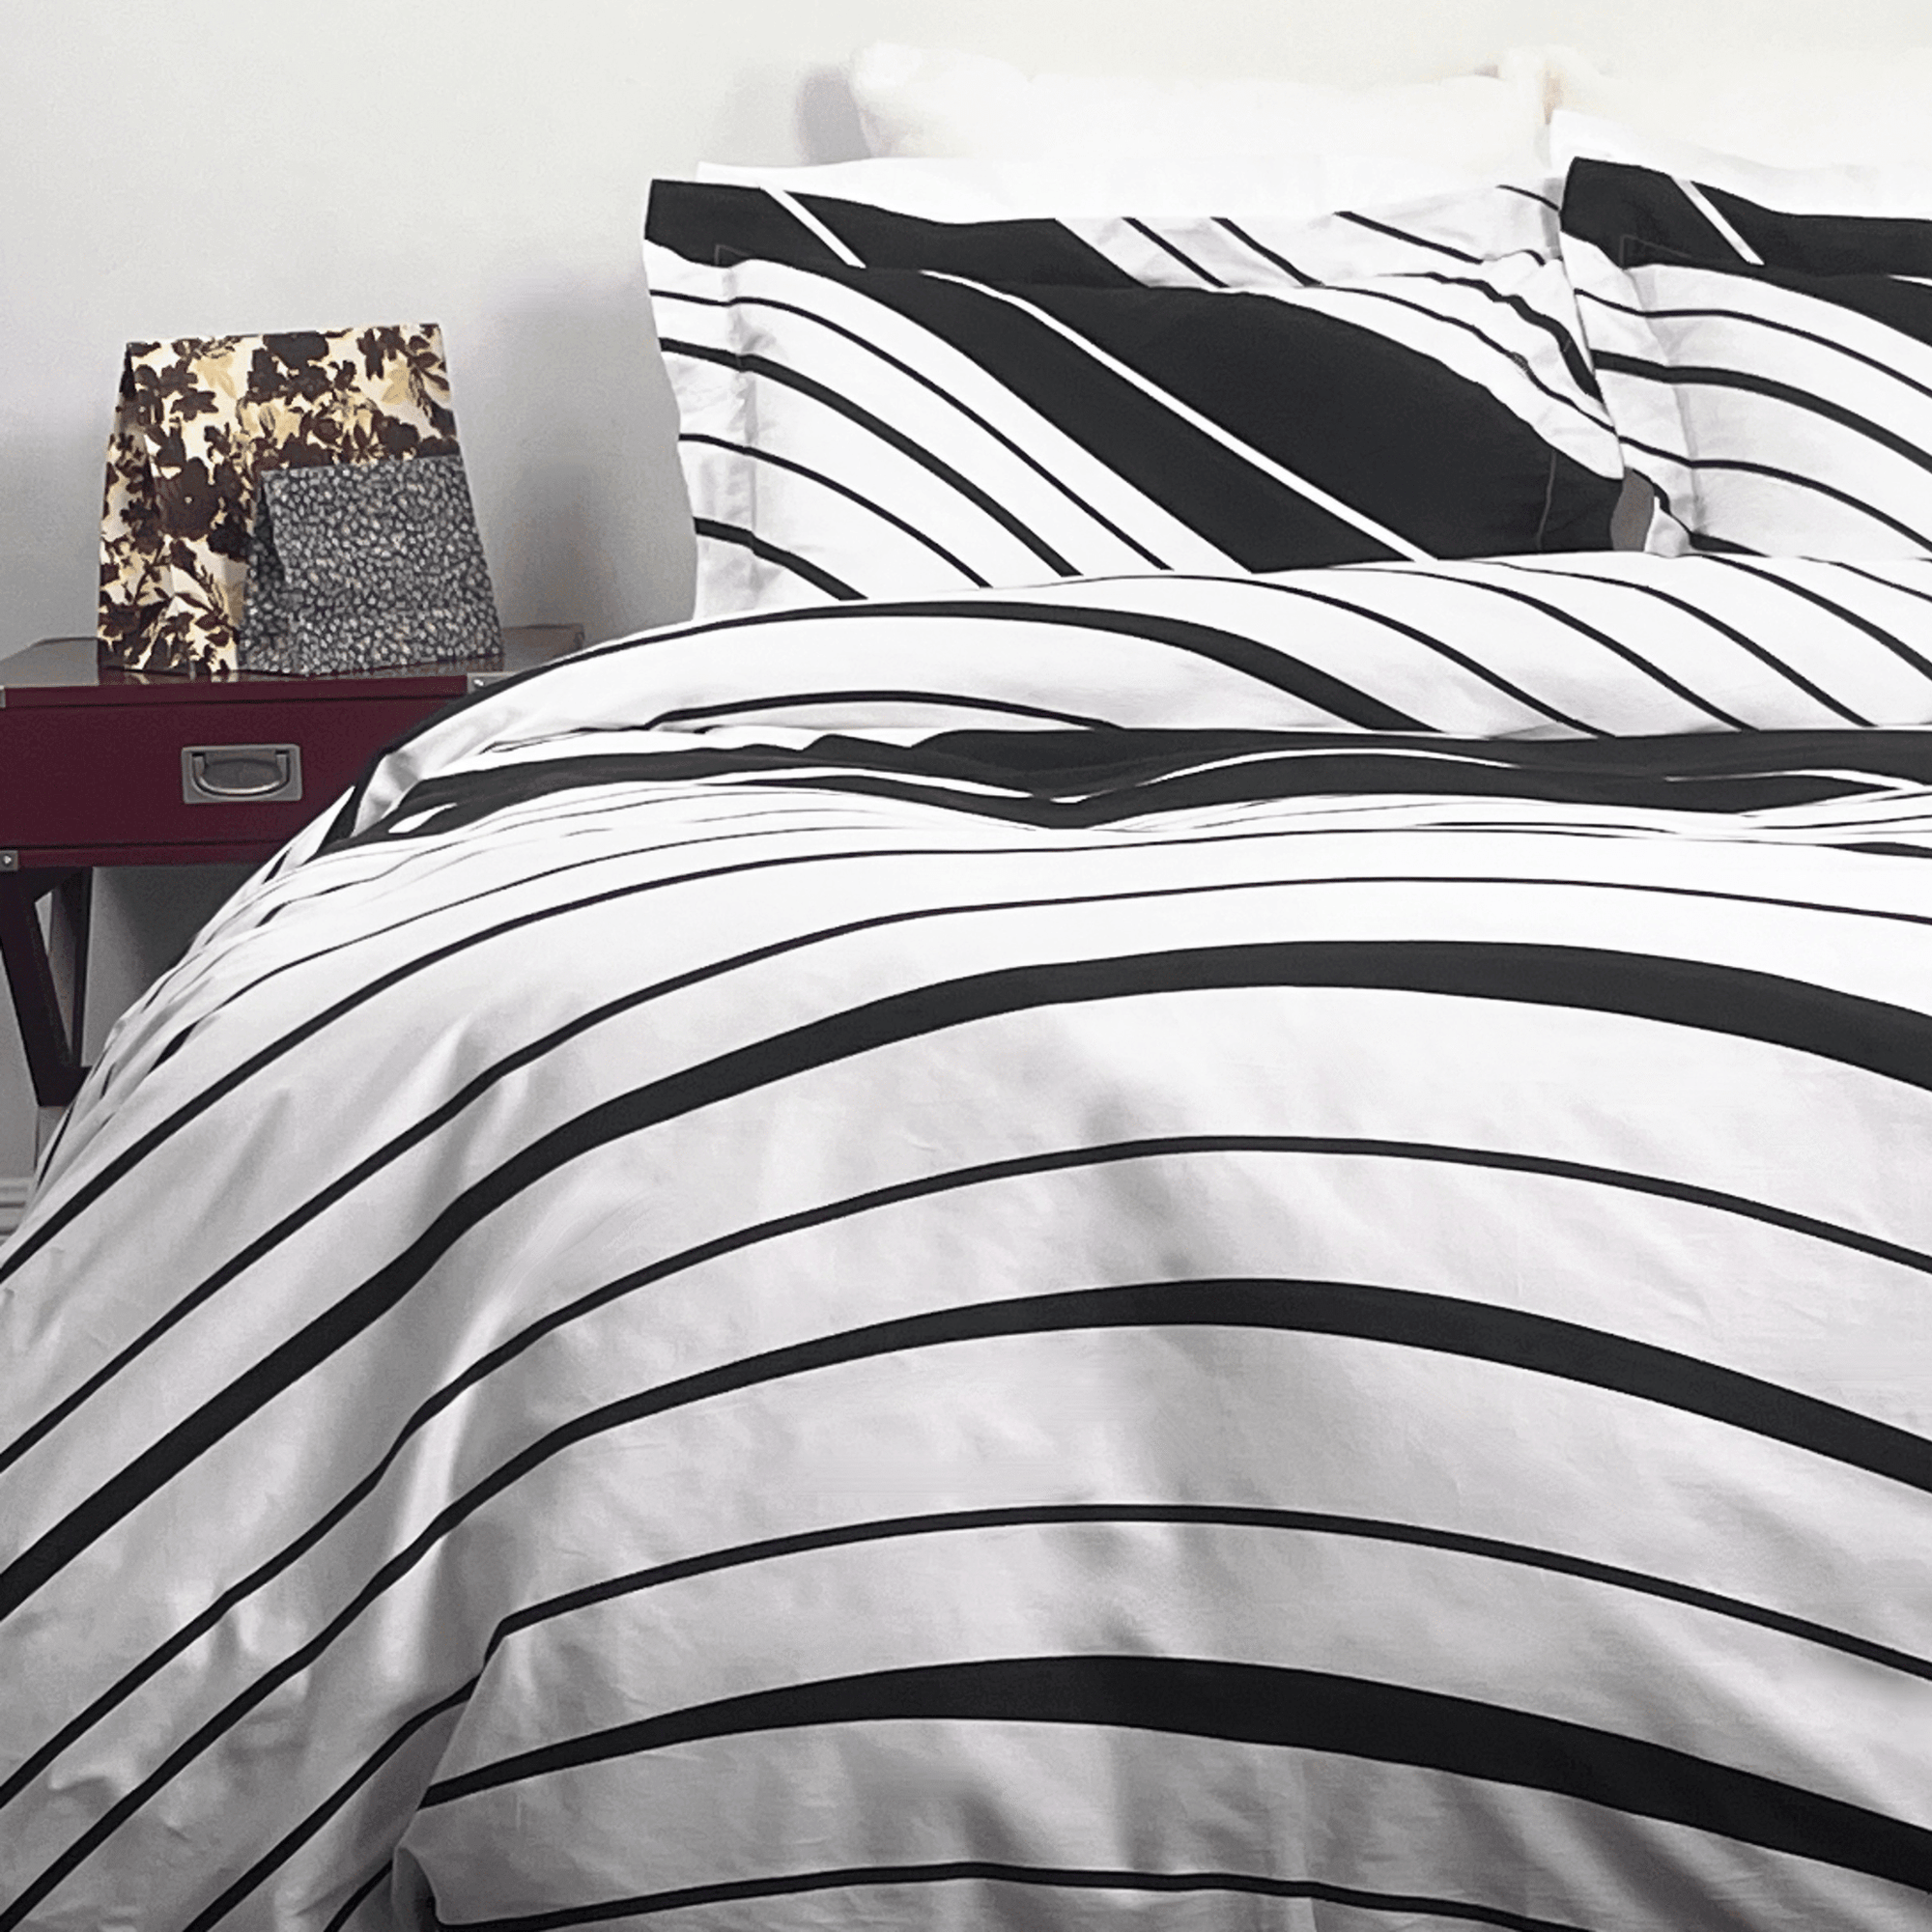 Beddley Waves of Comfort Black and White Bedding Print